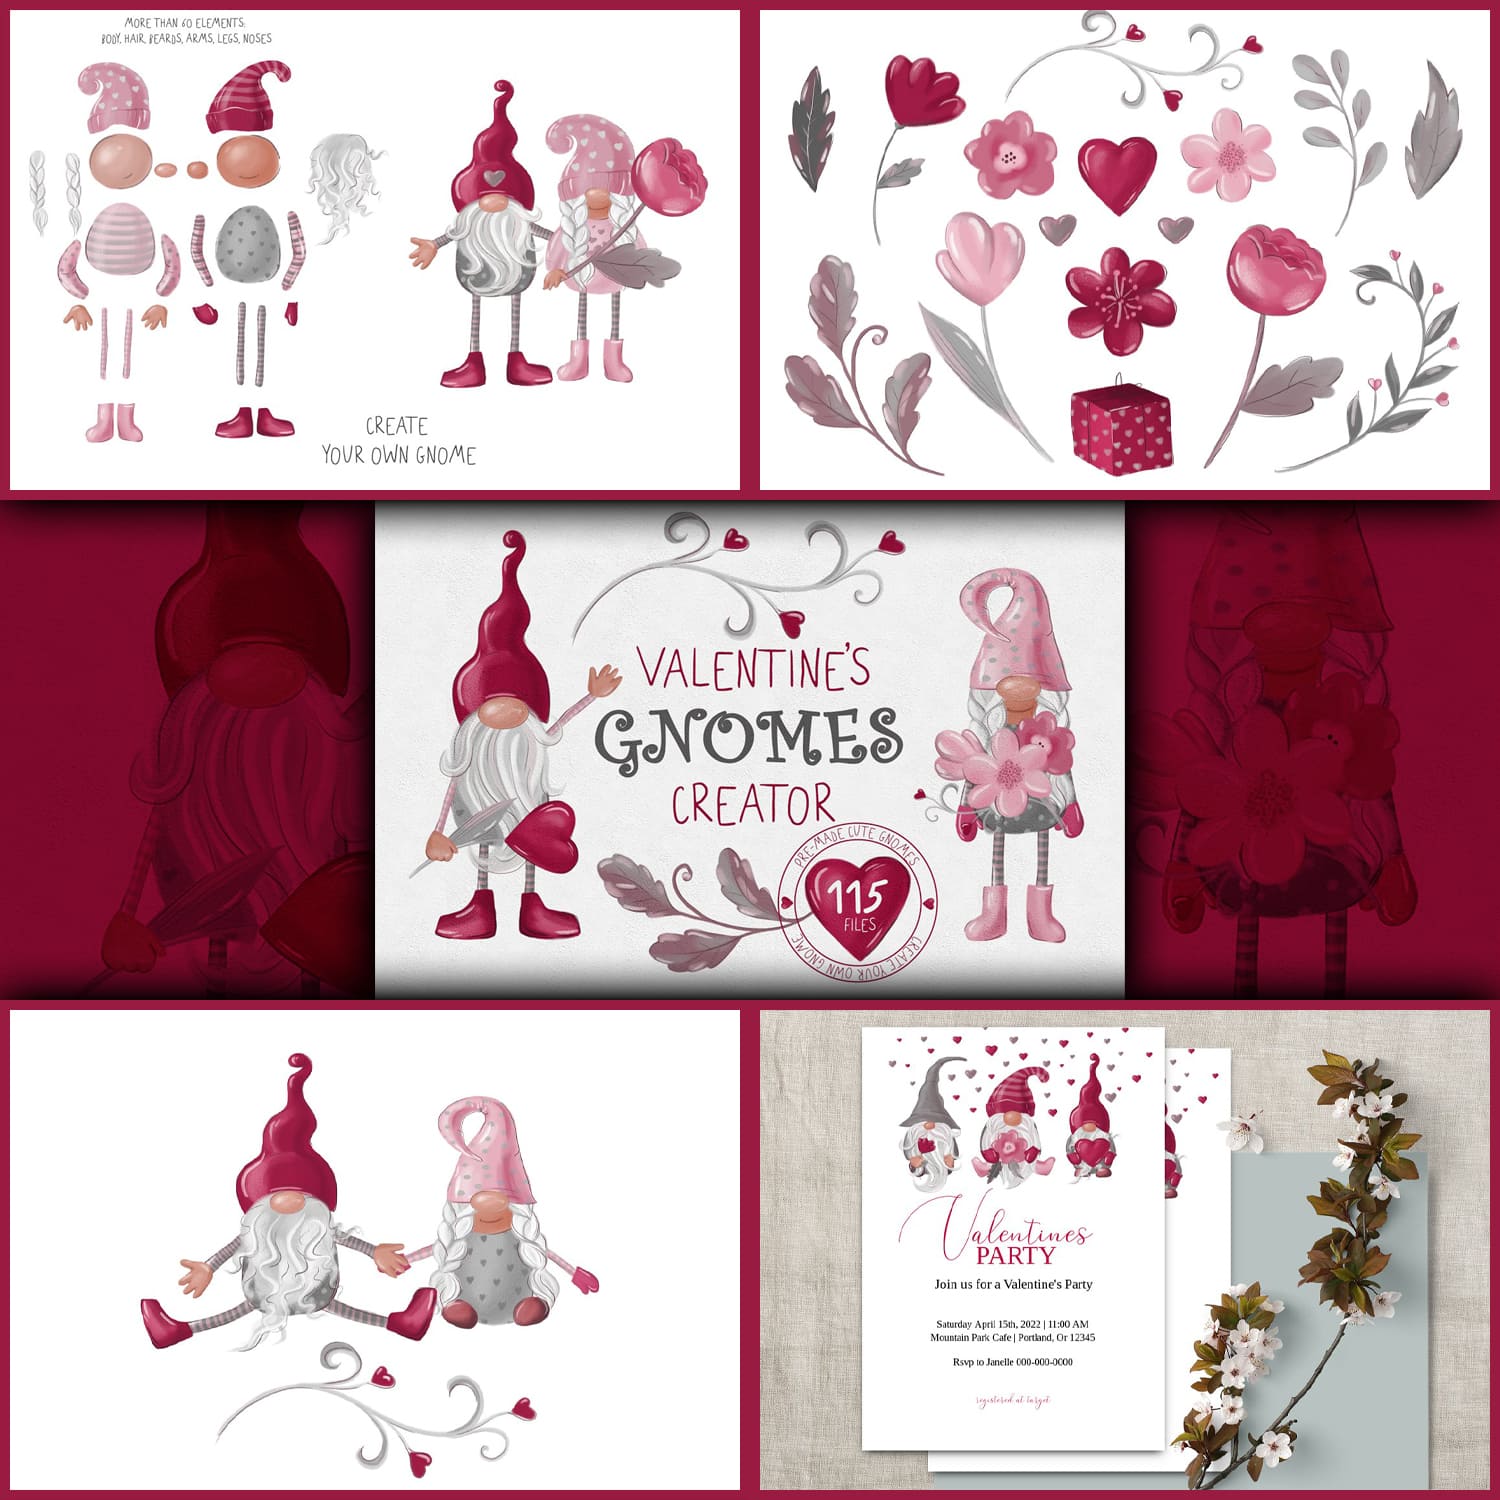 On a burgundy background, there are five slides with the image of gnomes in love.